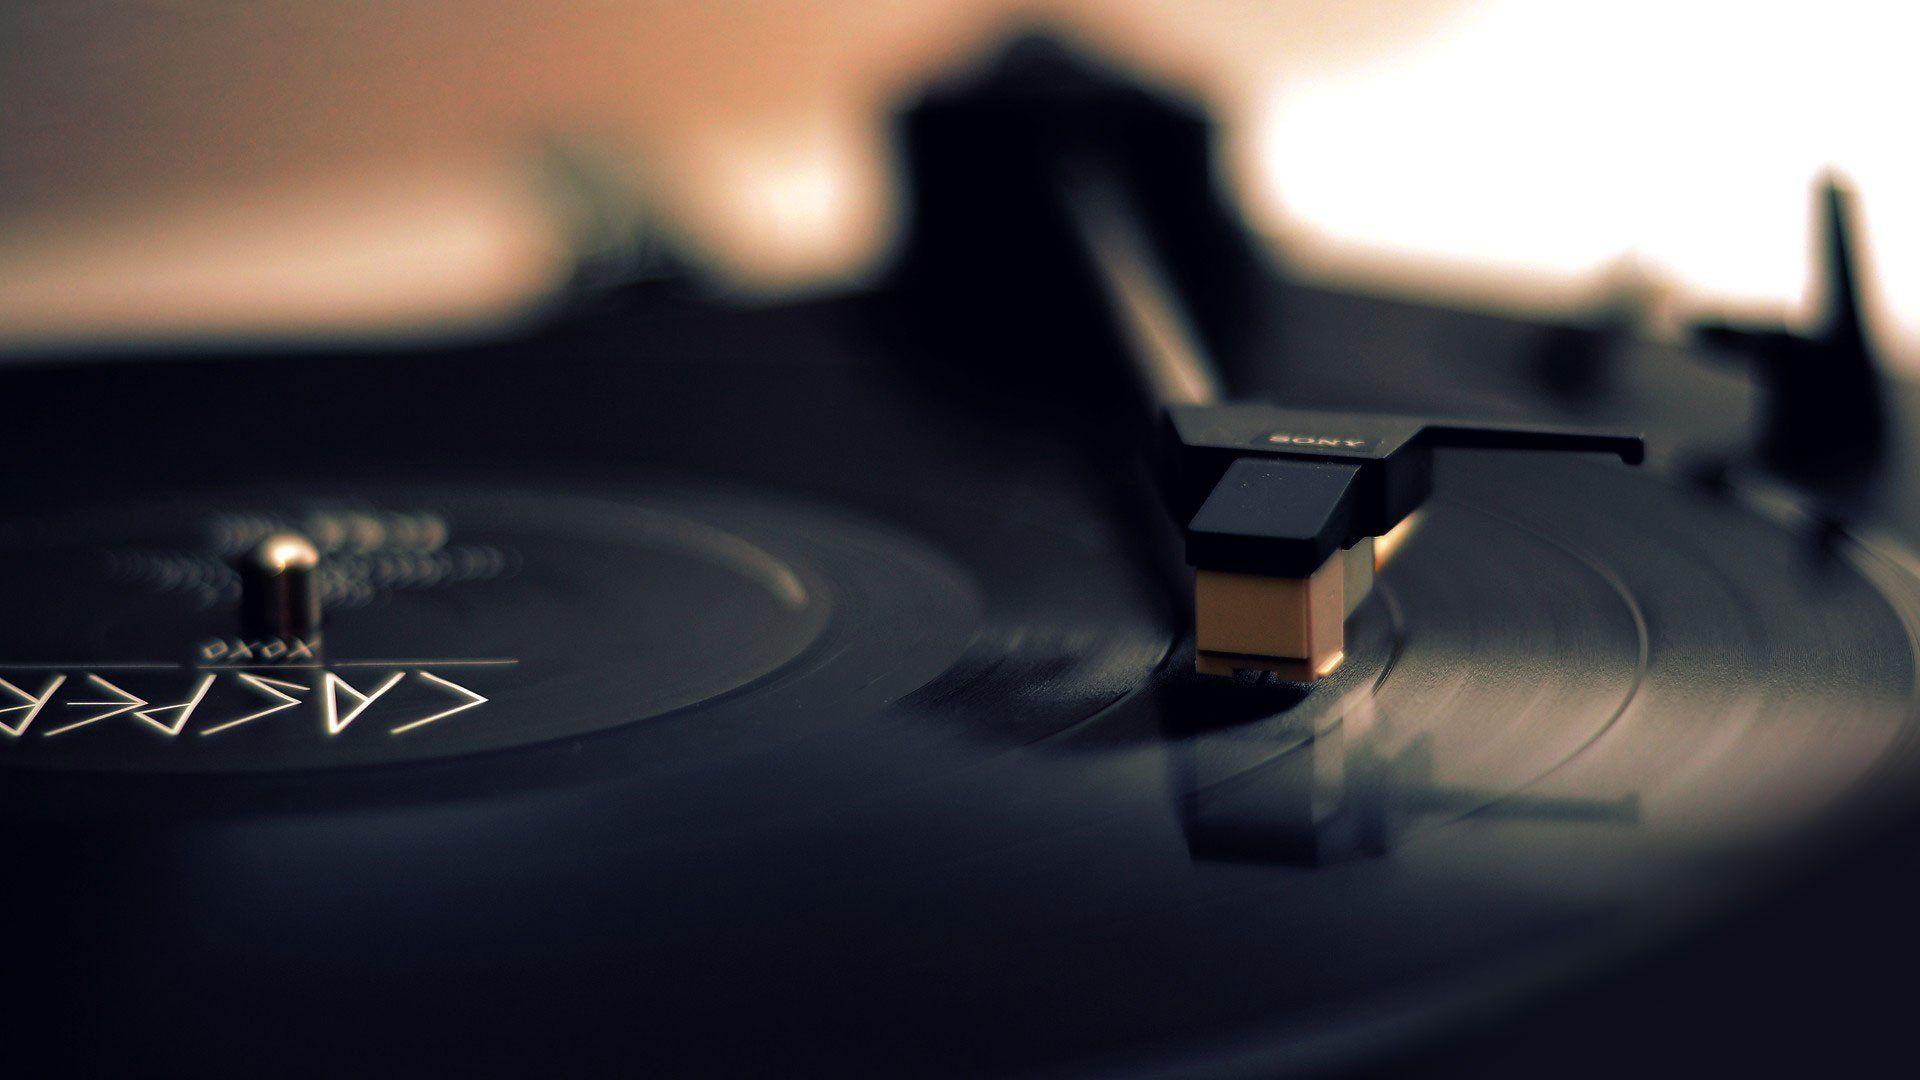 Turntable Wallpaper HD, Desktop Background, Image and Picture